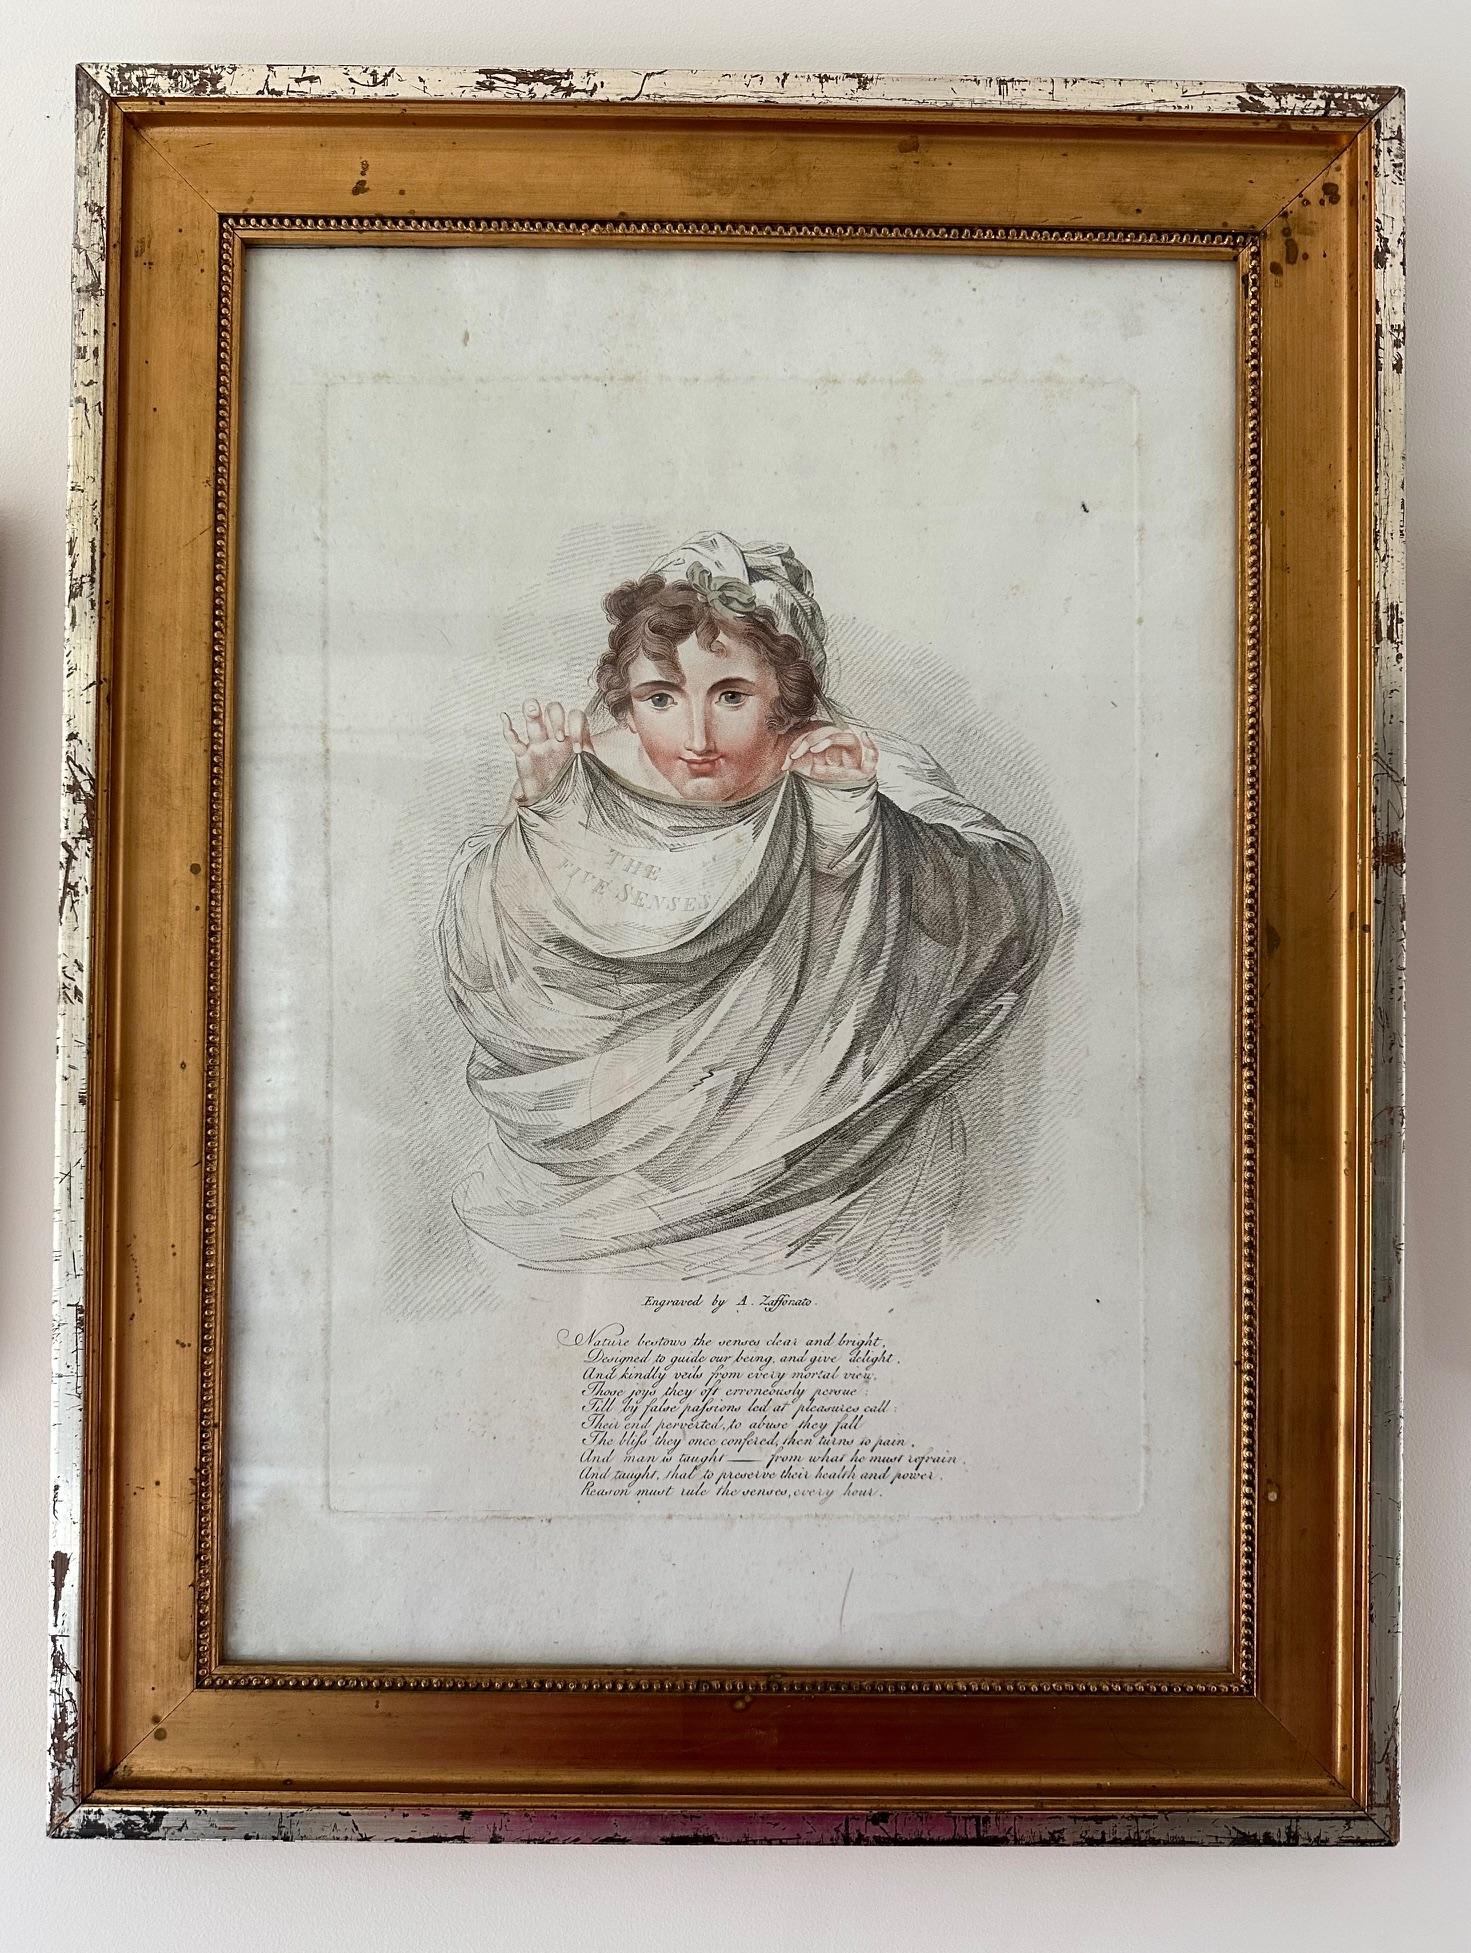 Charming set of four framed engravings by the listed Italian printmaker Angelo Zaffonato (fl.1780s-d.1835) created around 1800.

Titled 